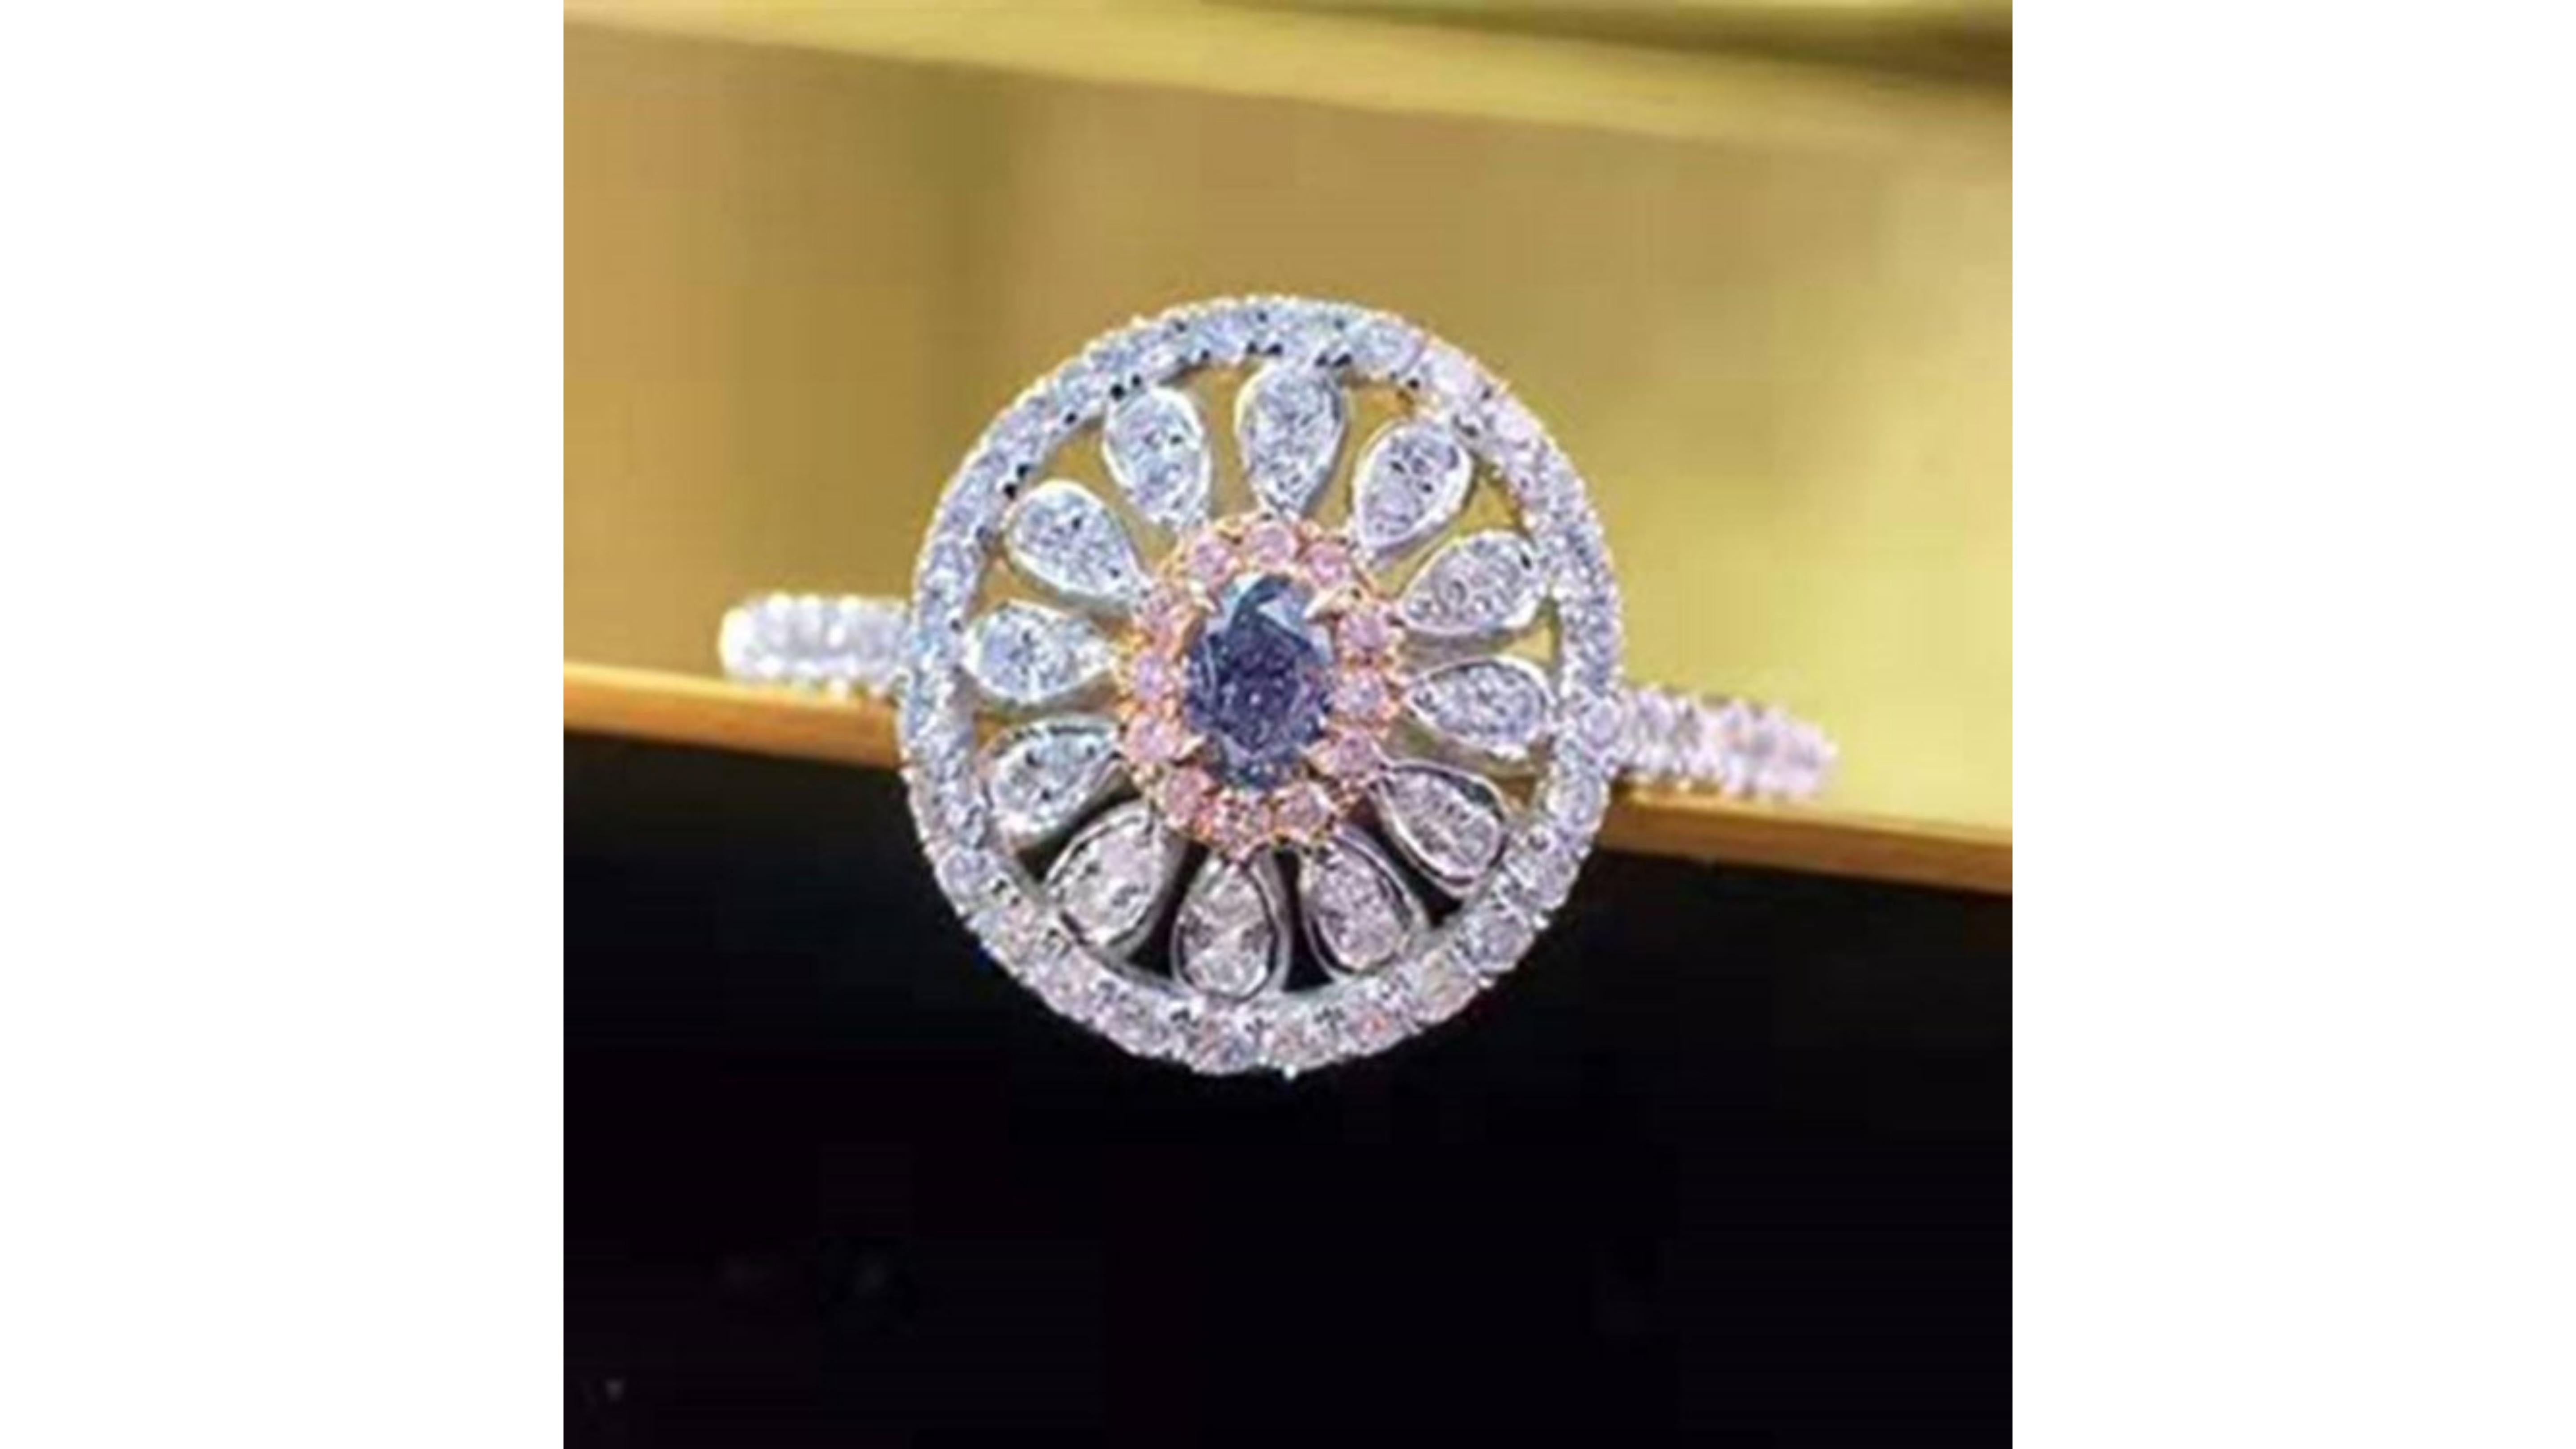 Fancy Blue And Pink Diamond Ring with 51 diamonds  set in 18 Karat White Gold .    This is a Blue Diamond  with small Pink Diamonds around it and also White ones too.   A lot of these came from the Argyle mine in Australia which has closed down so